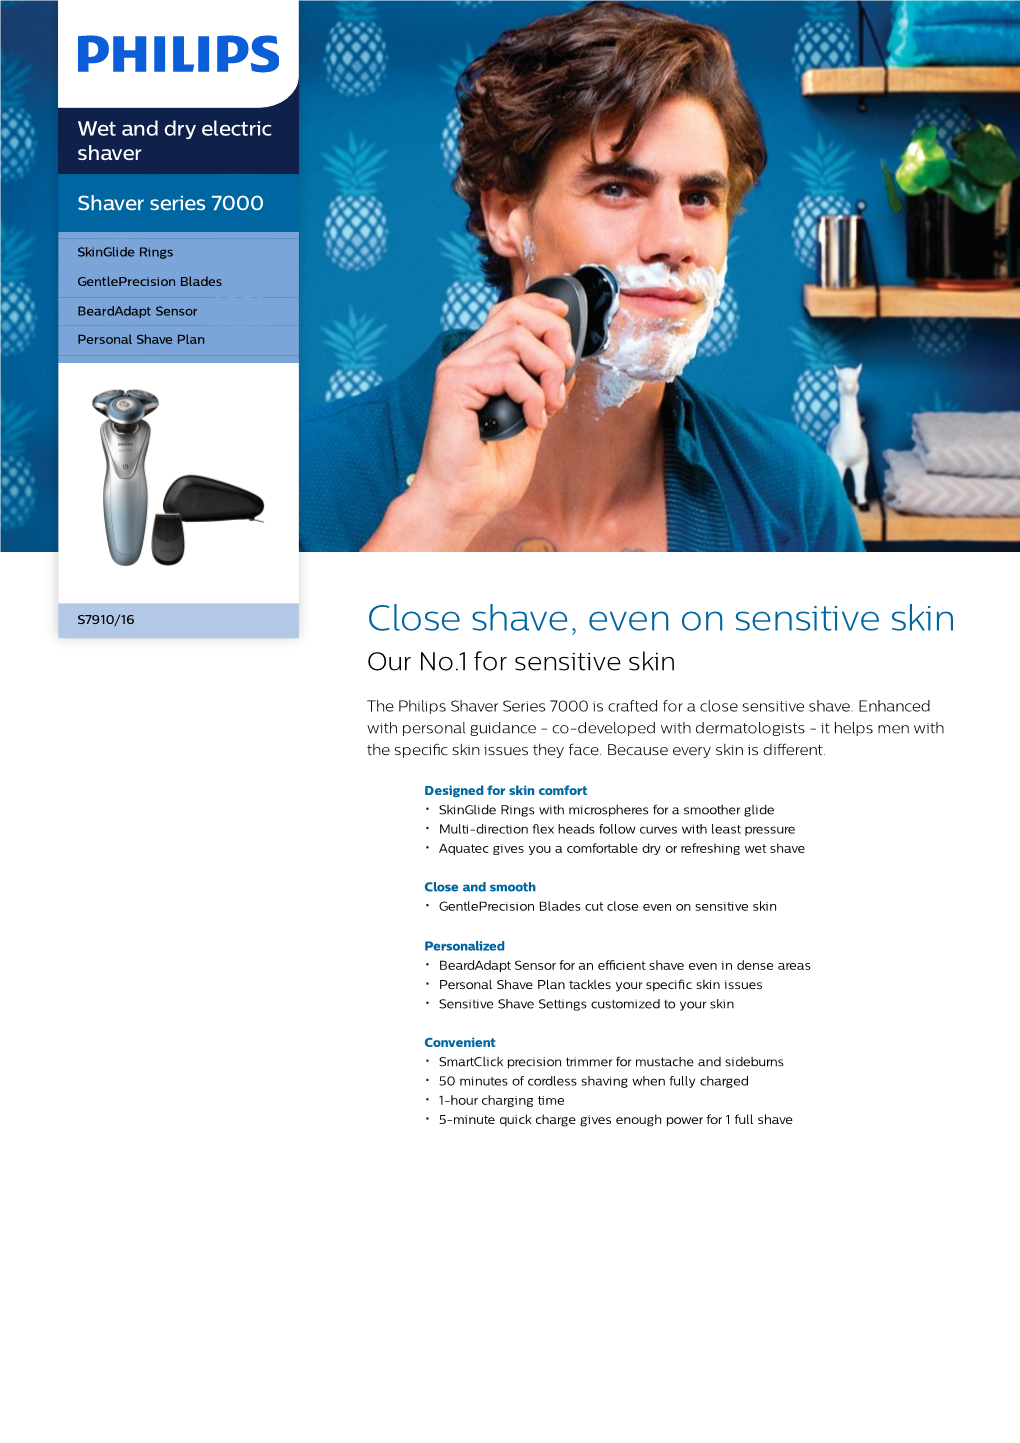 S7910/16 Philips Wet and Dry Electric Shaver